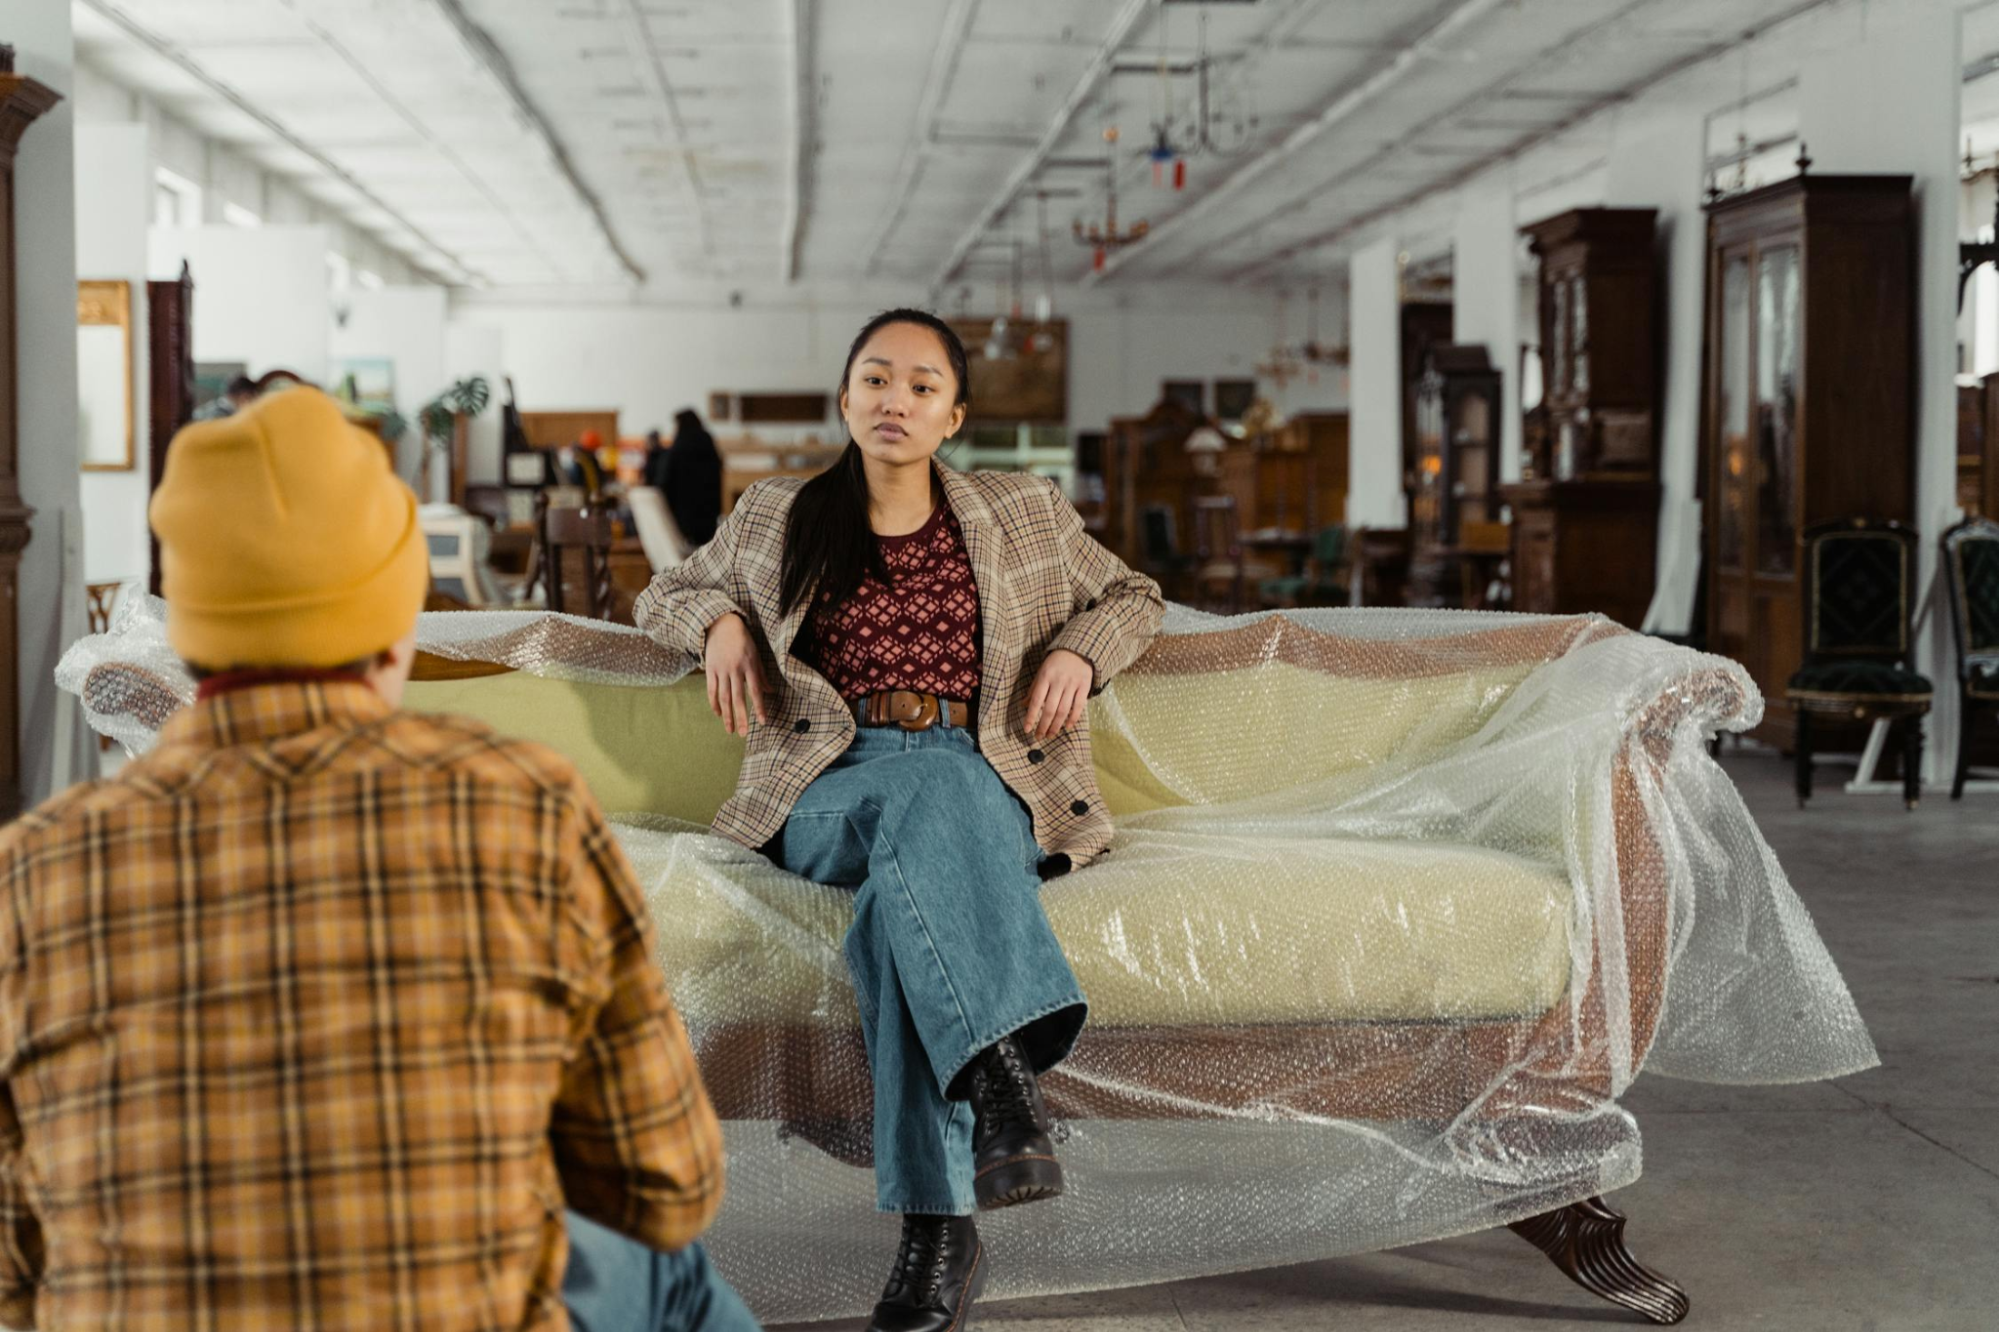 Two people shop for a vintage couch in a used furniture warehouse.